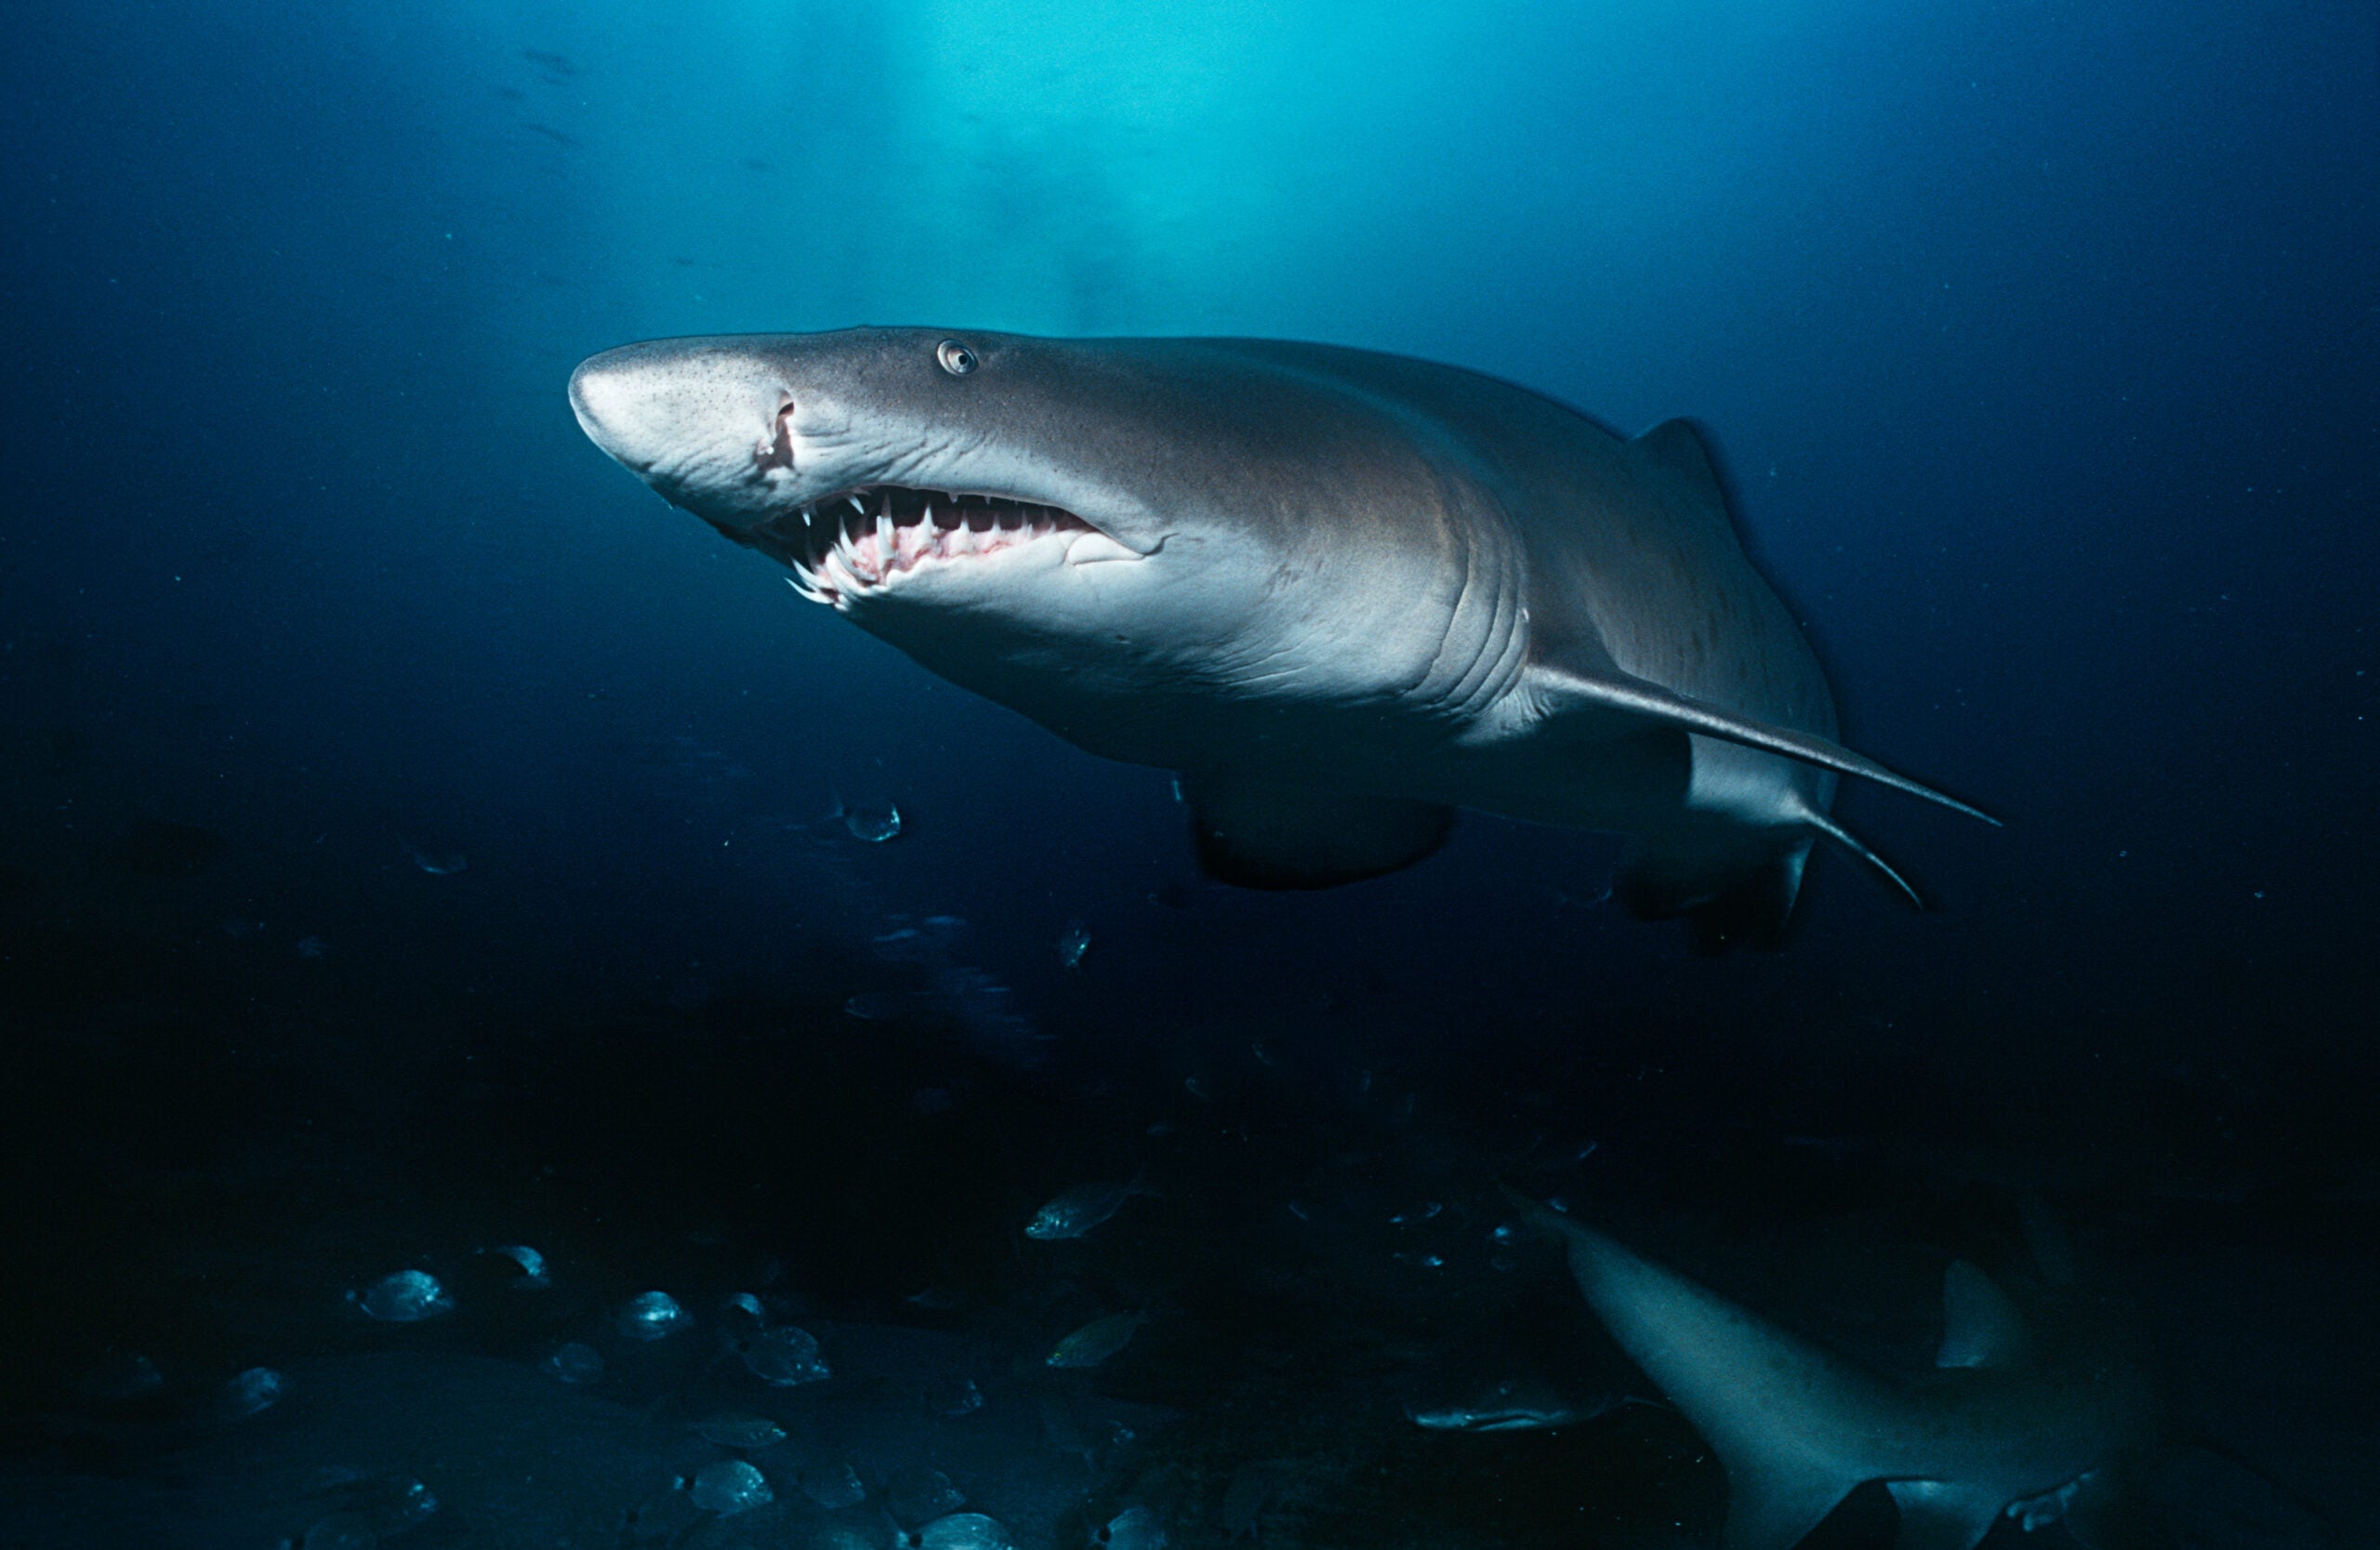 Sand tiger shark swimming in the ocean